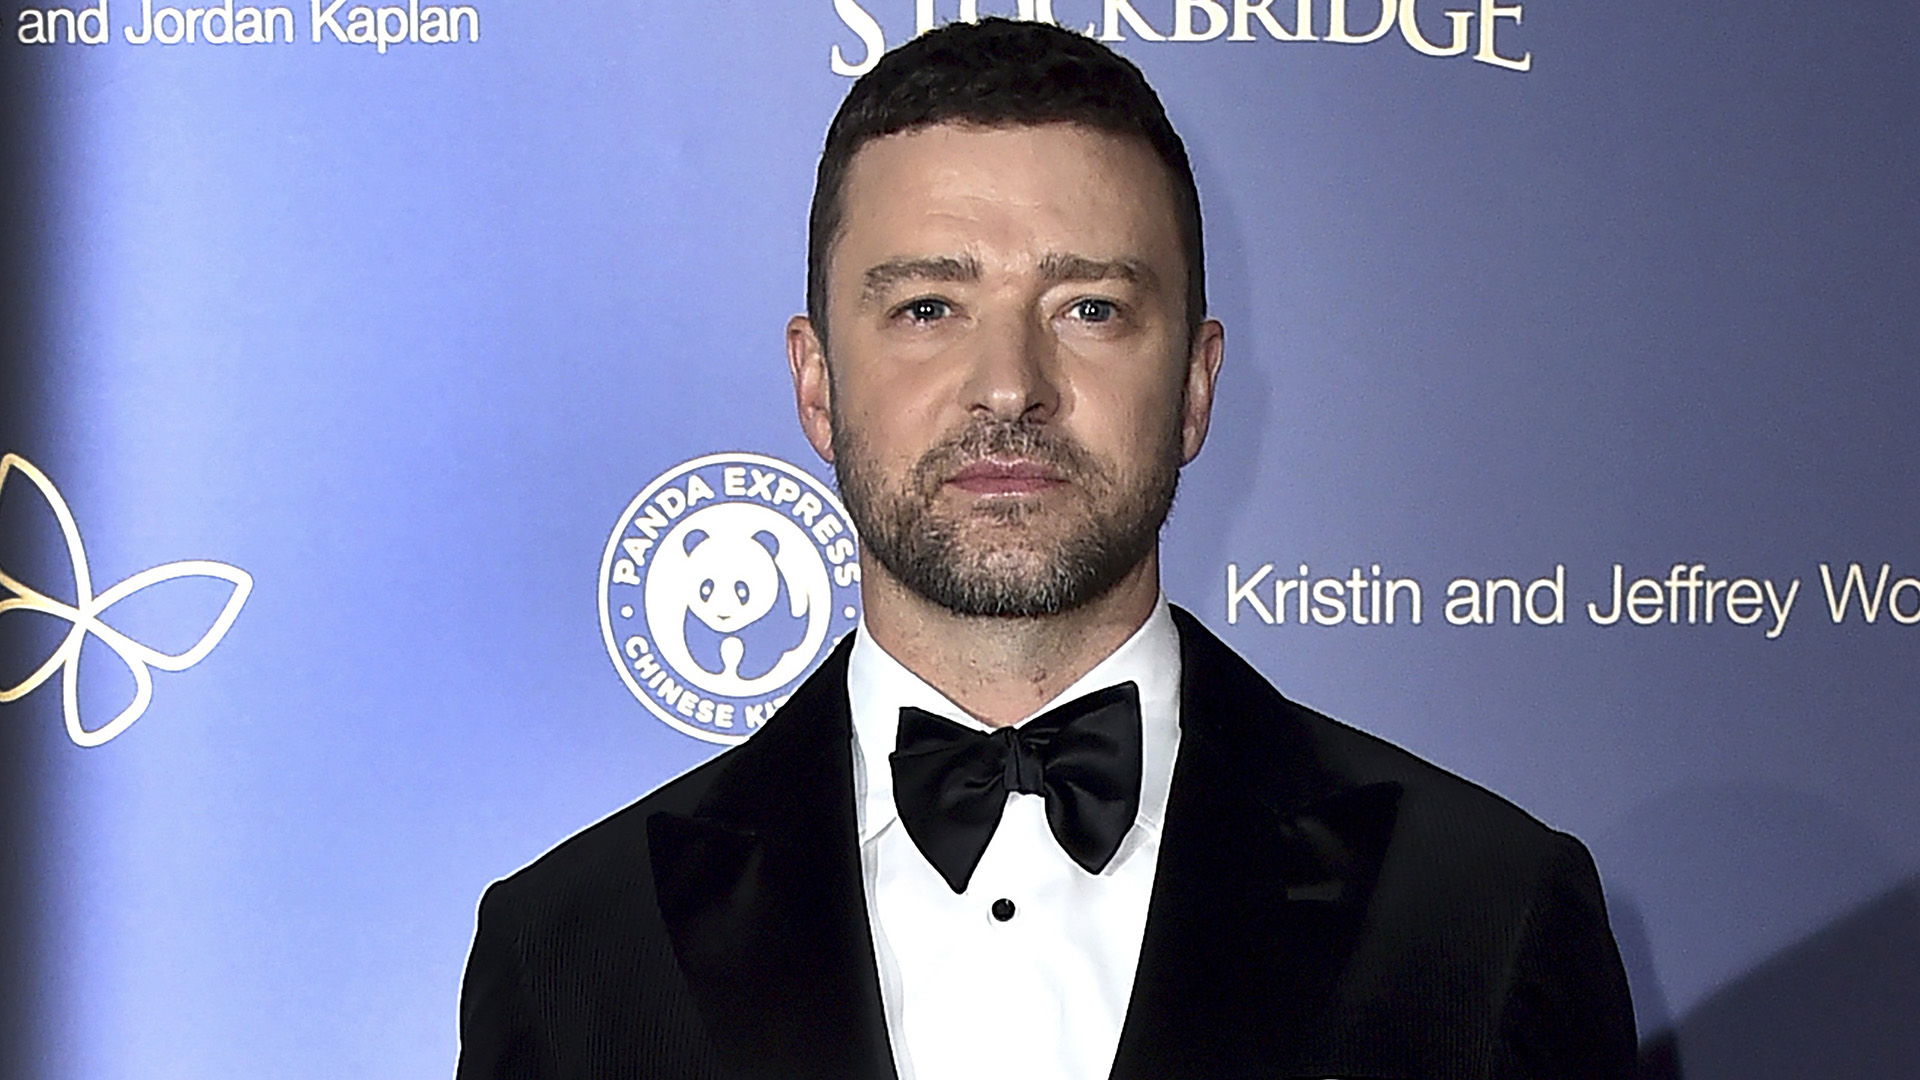 Justin Timberlake's lawyer speaks out after DWI arrest in New York